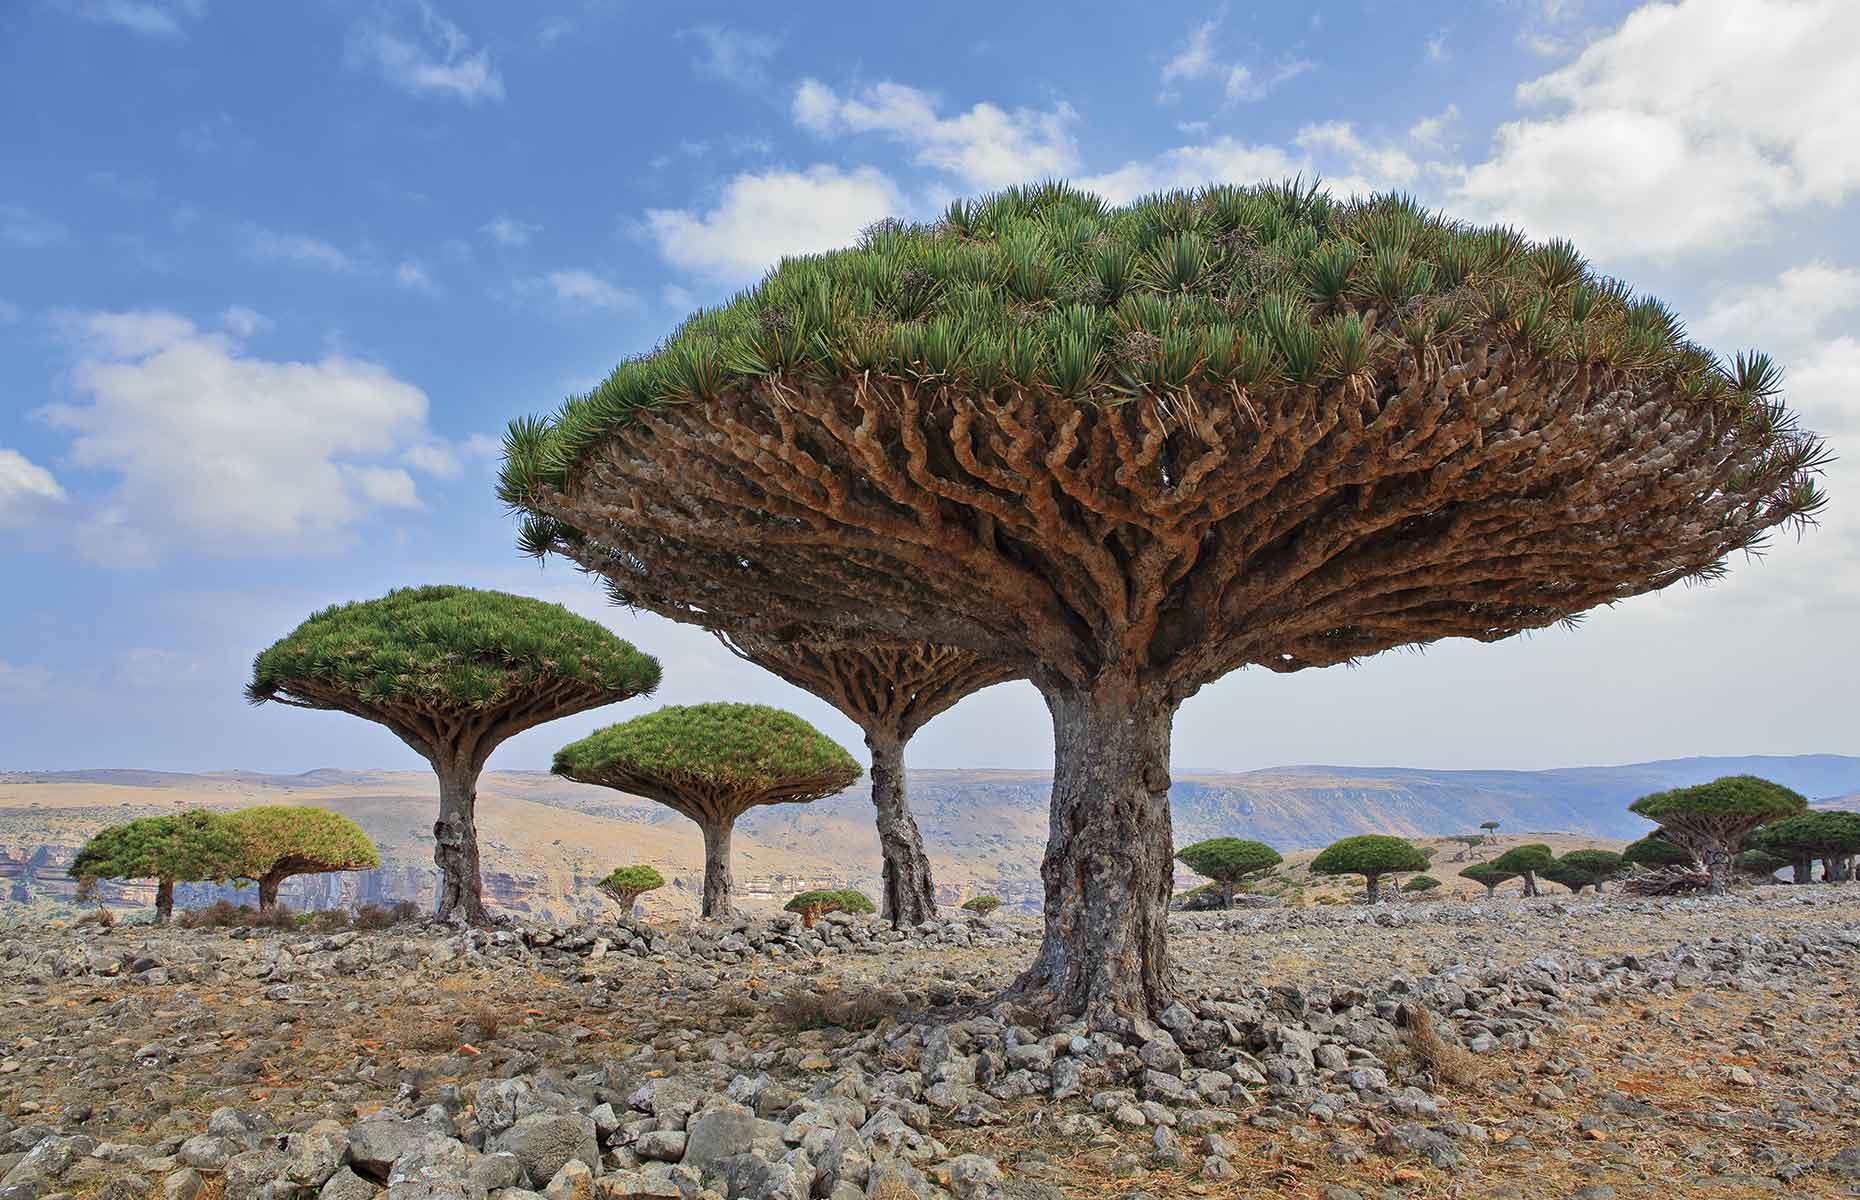 <p>This tree’s unusual shape is an adaptation to the arid climate and rocky terrain. The umbrella-like covering captures moisture, provides shade and reduces evaporation, allowing seeds to grow beneath adult trees. Small quantities of the dragon’s blood tree’s berries are fed to goats, while for centuries the tree’s red resin has been used as a dye. Classified as vulnerable, the species is suffering from overgrazing by goats, the impact of severe cyclones, and the gradual drying out of the archipelago. </p>